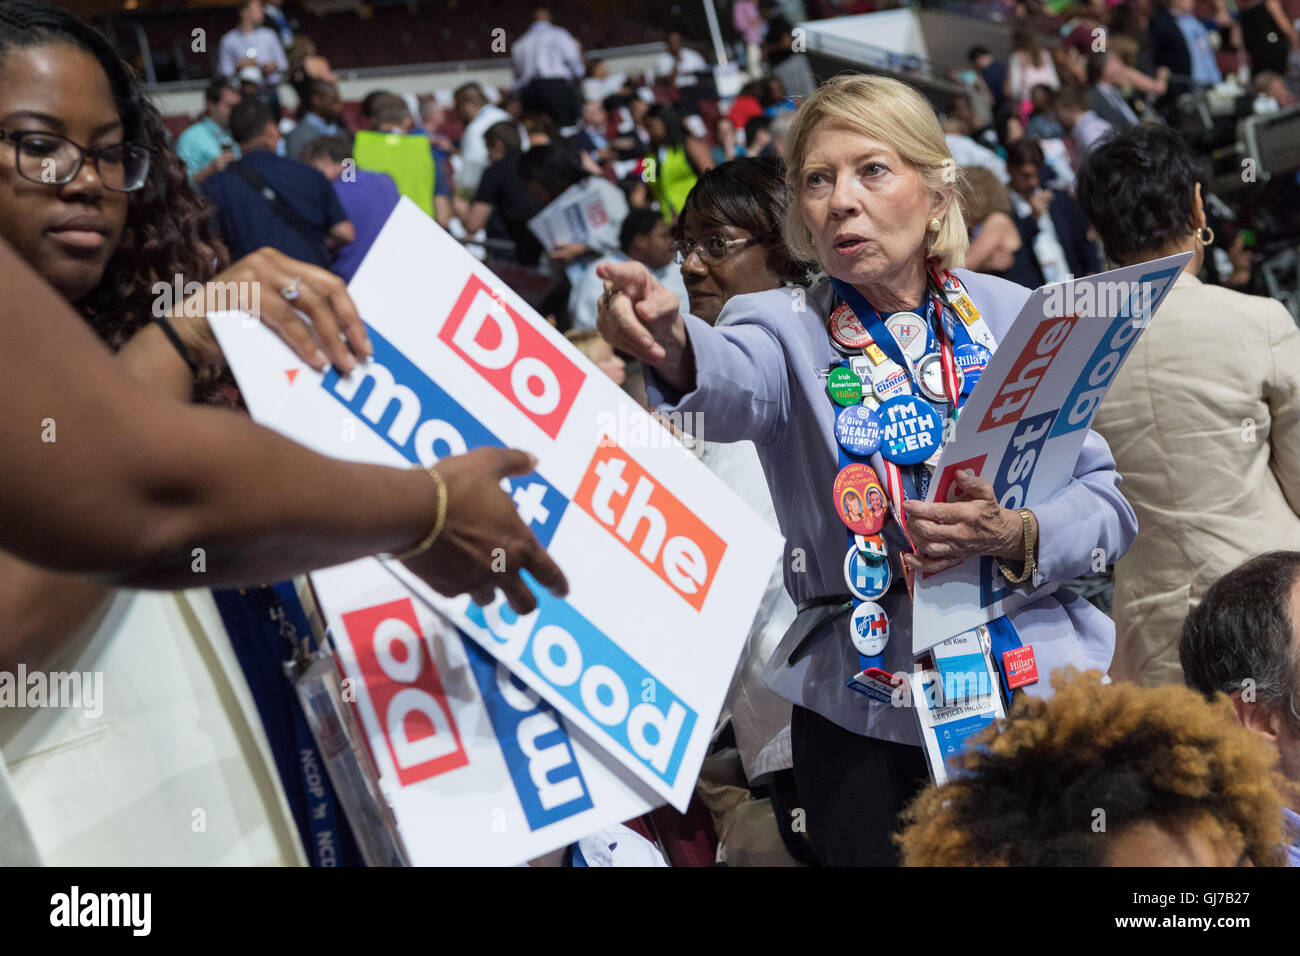 A Democratic delegate hands out signs in the stands before the start of the 2nd day of the Democratic National Convention at the Wells Fargo Center July 26, 2016 in Philadelphia, Pennsylvania. Stock Photo